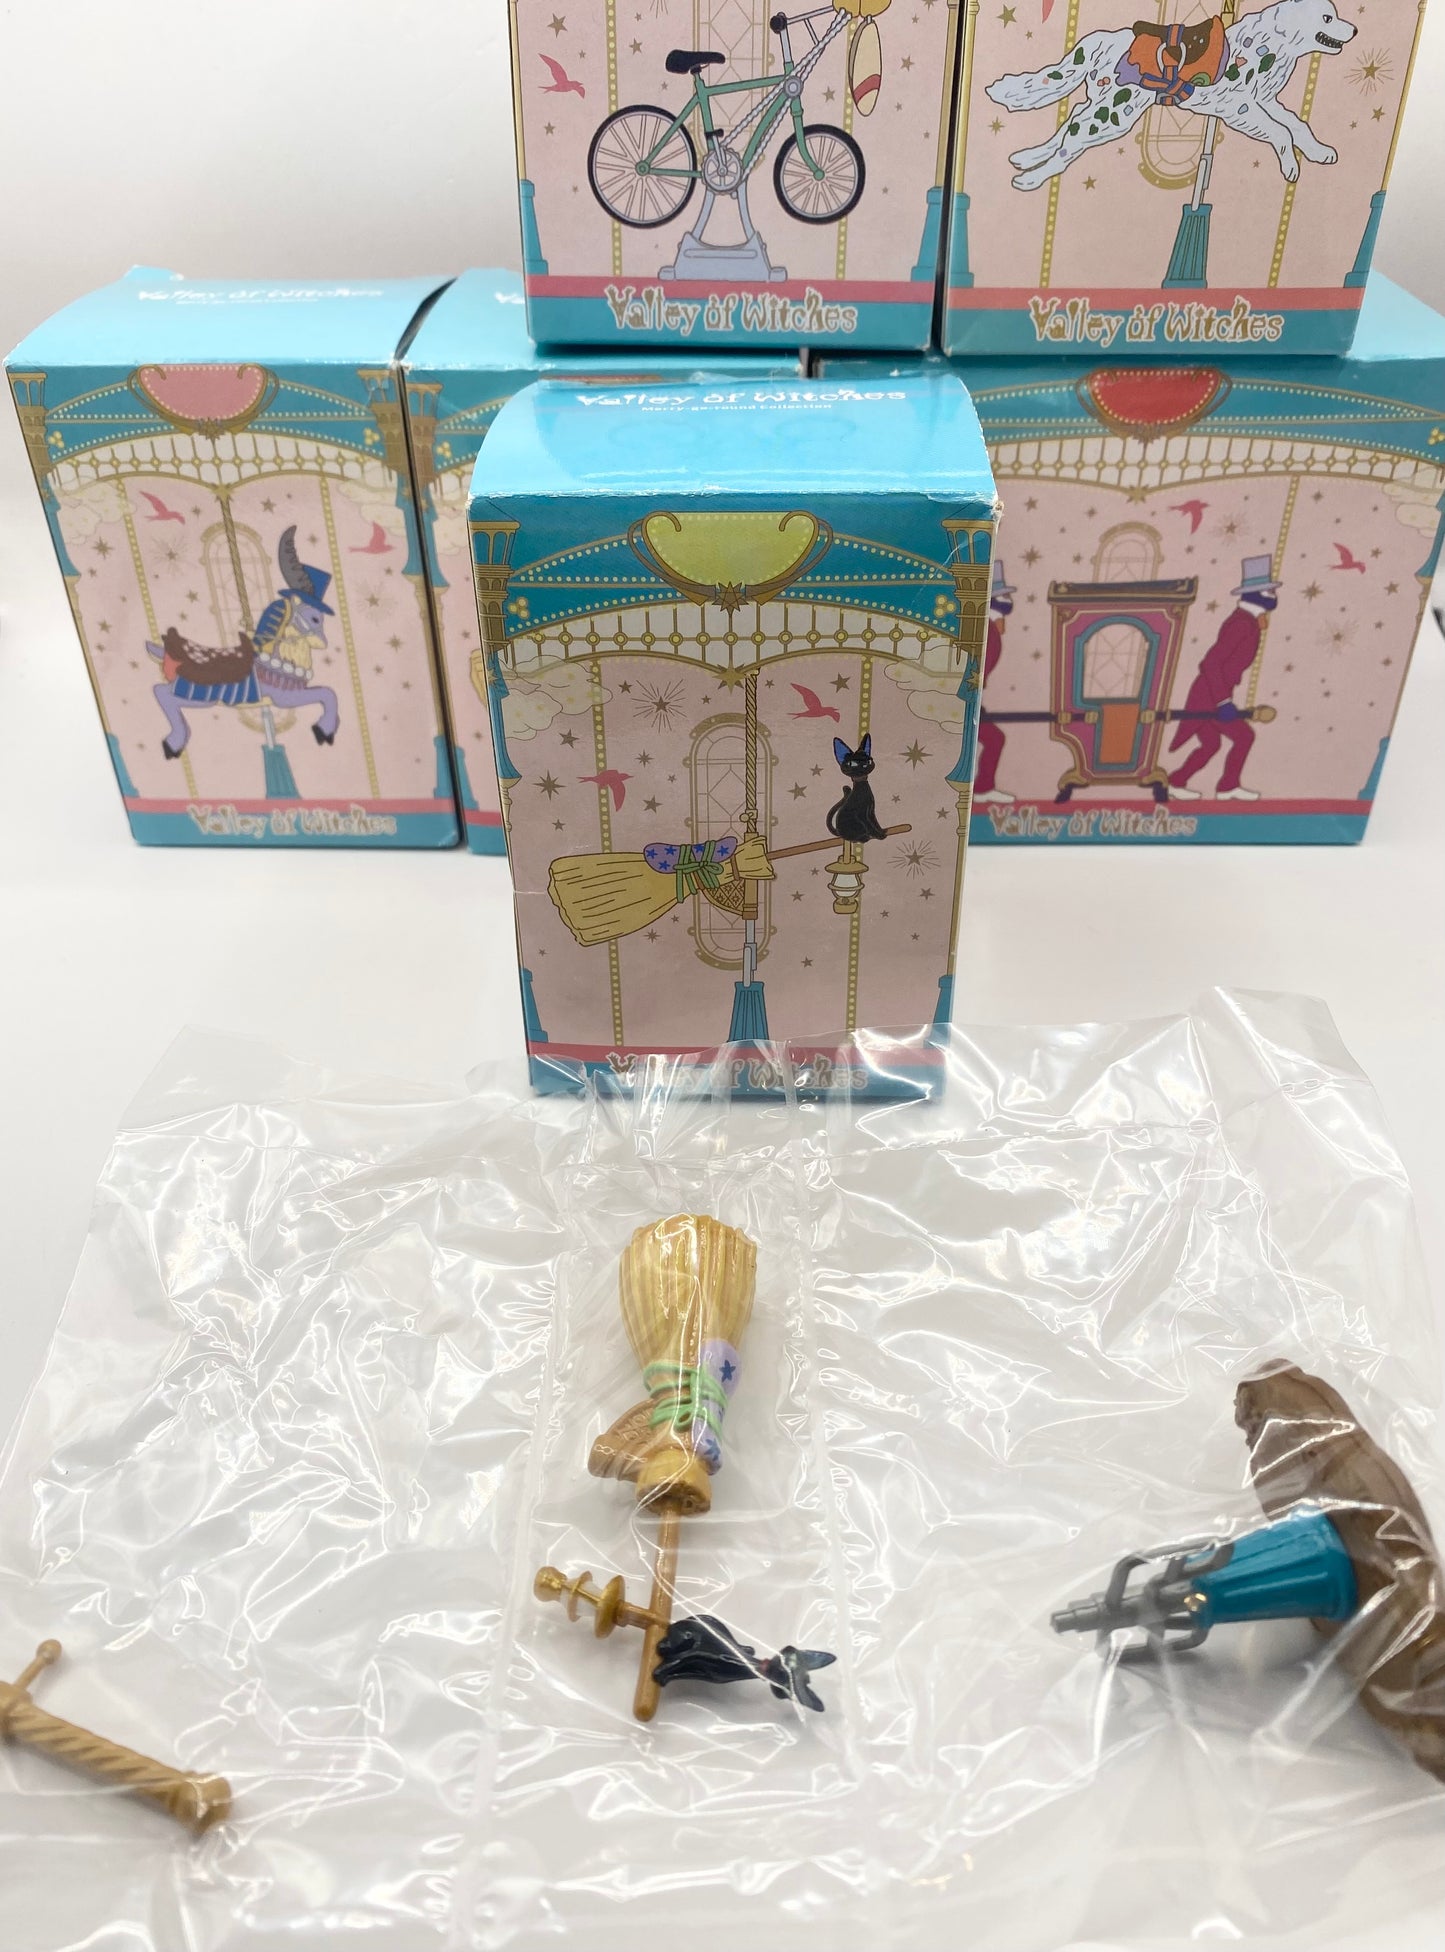 Studio Ghibli - Ghibli Park - ‘Valley of Witches - Merry Go Round Collection’ 6 Piece